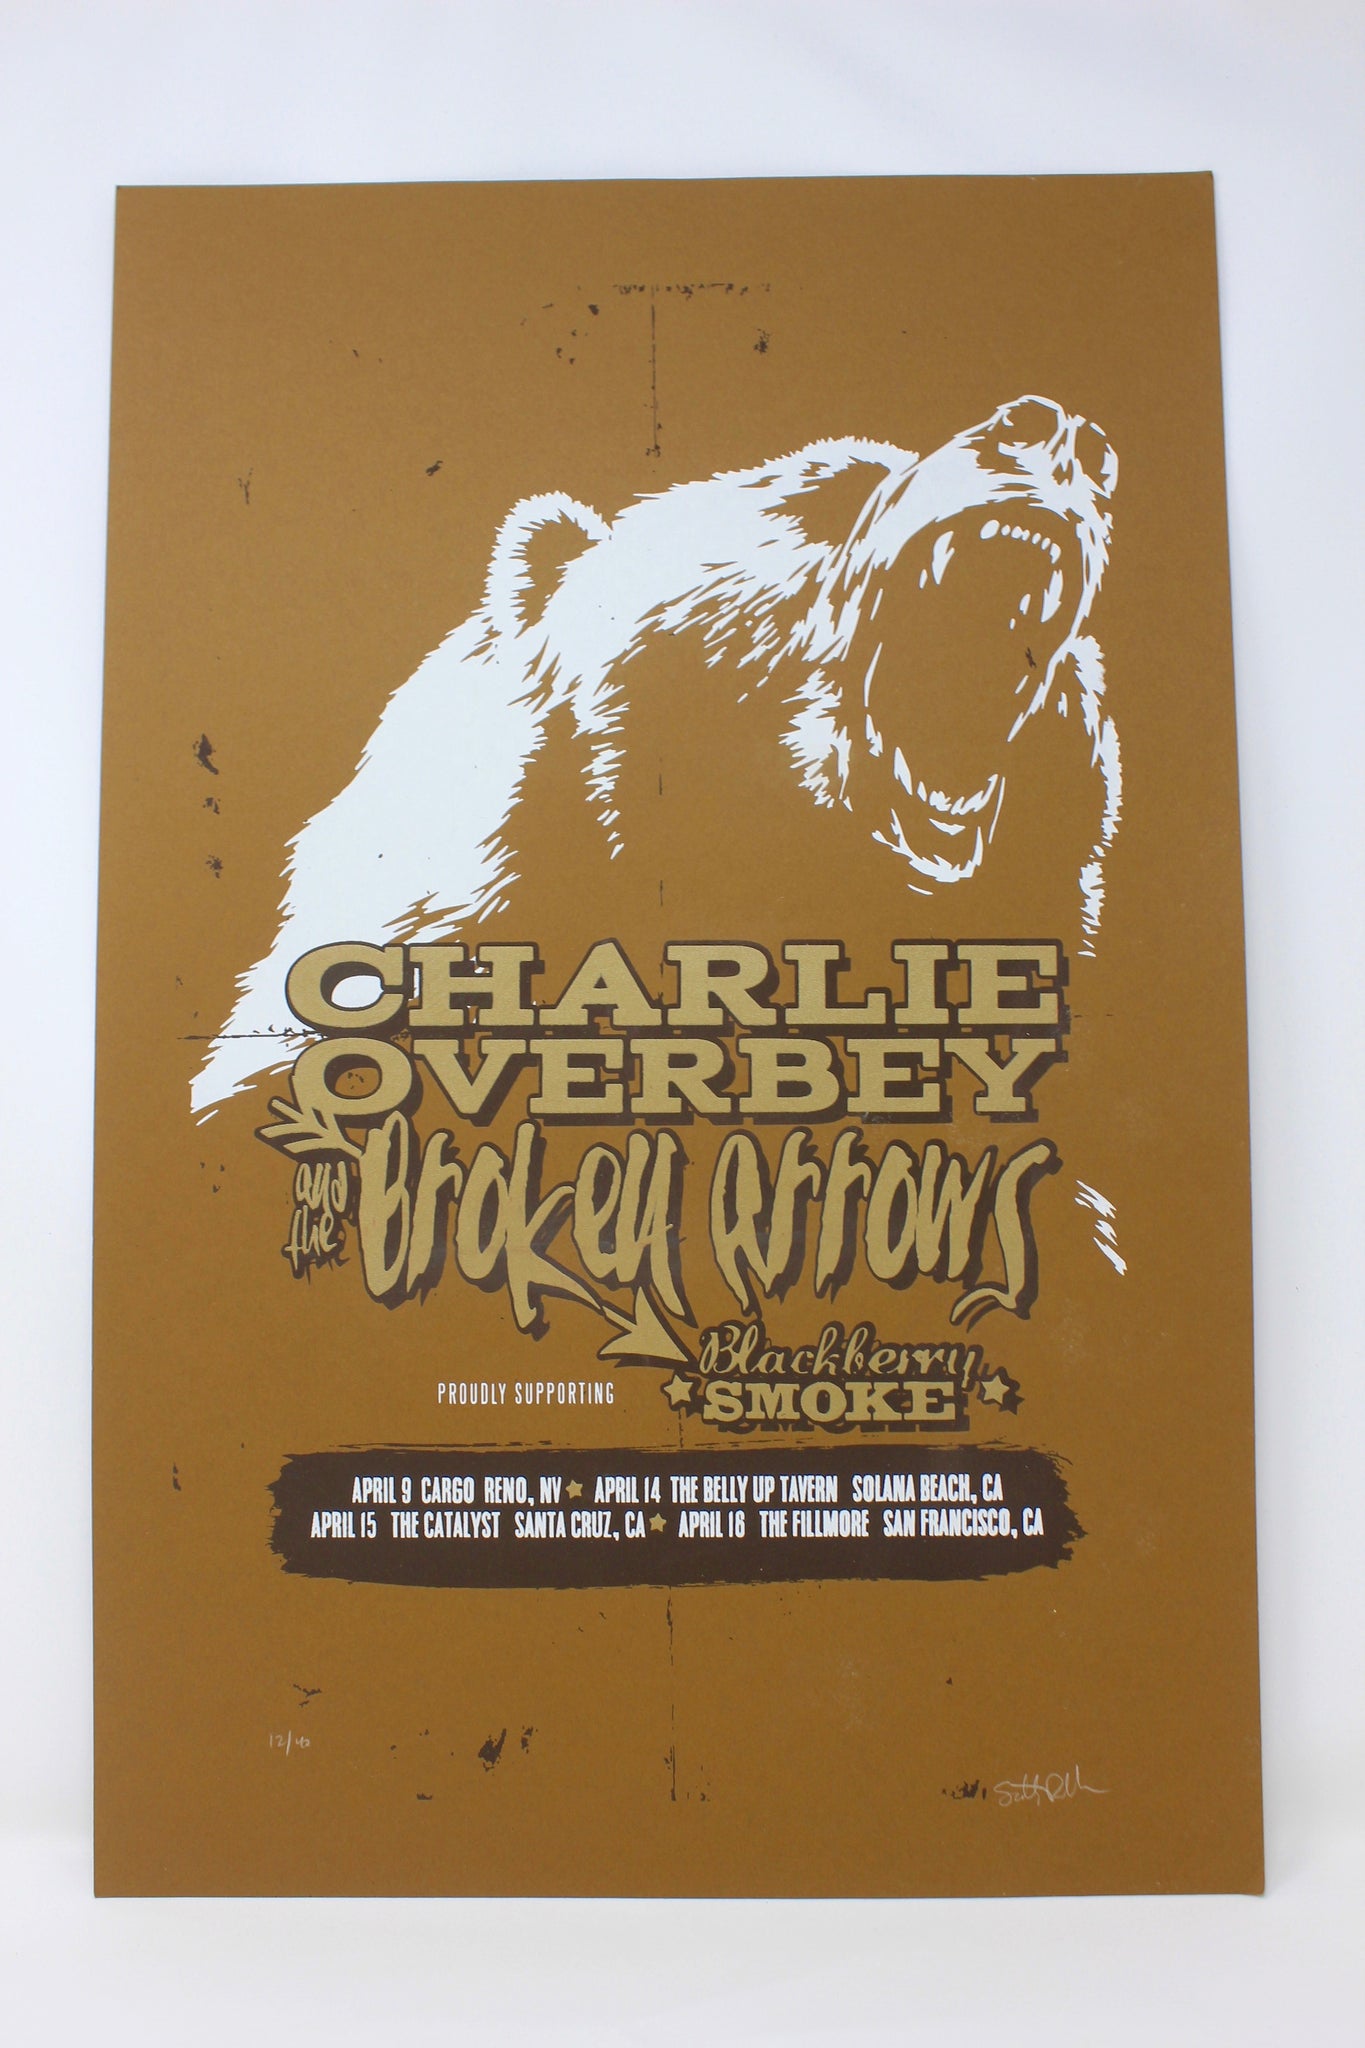 Blackberry Smoke / Charlie Overbey & The Broken Arrows 2015 Show Poster Limited Edition